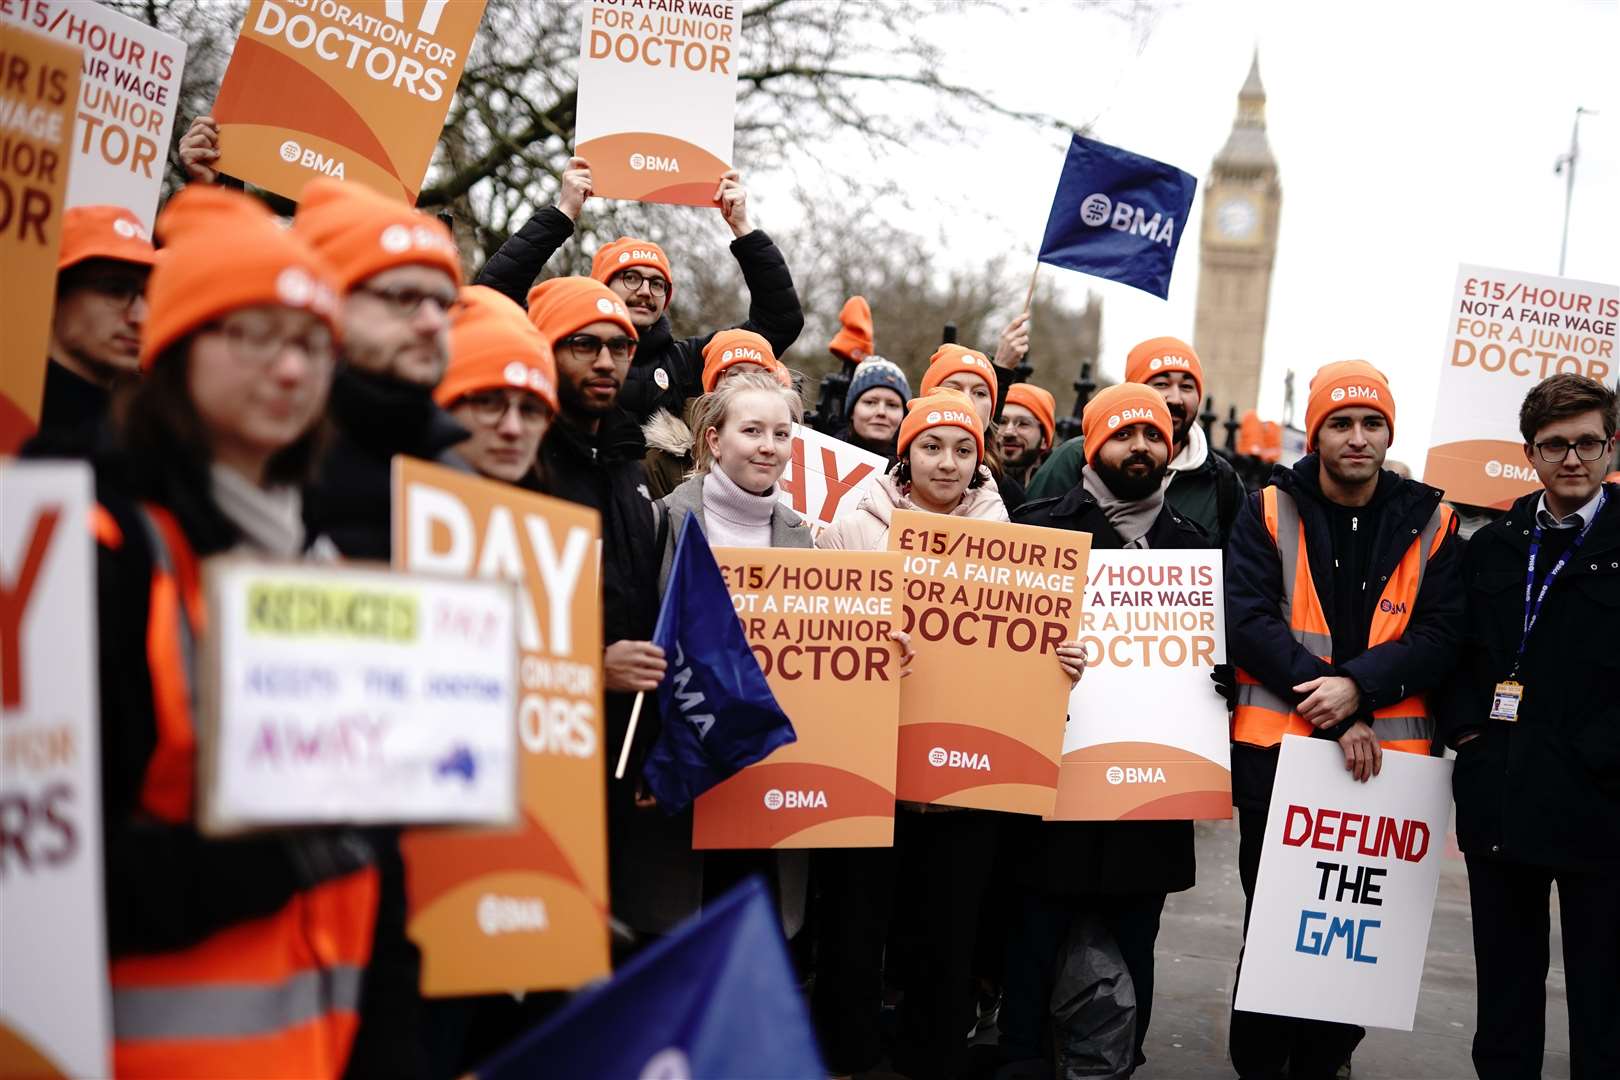 NHS in England under ‘severe pressure’ as strike action continues – health chief